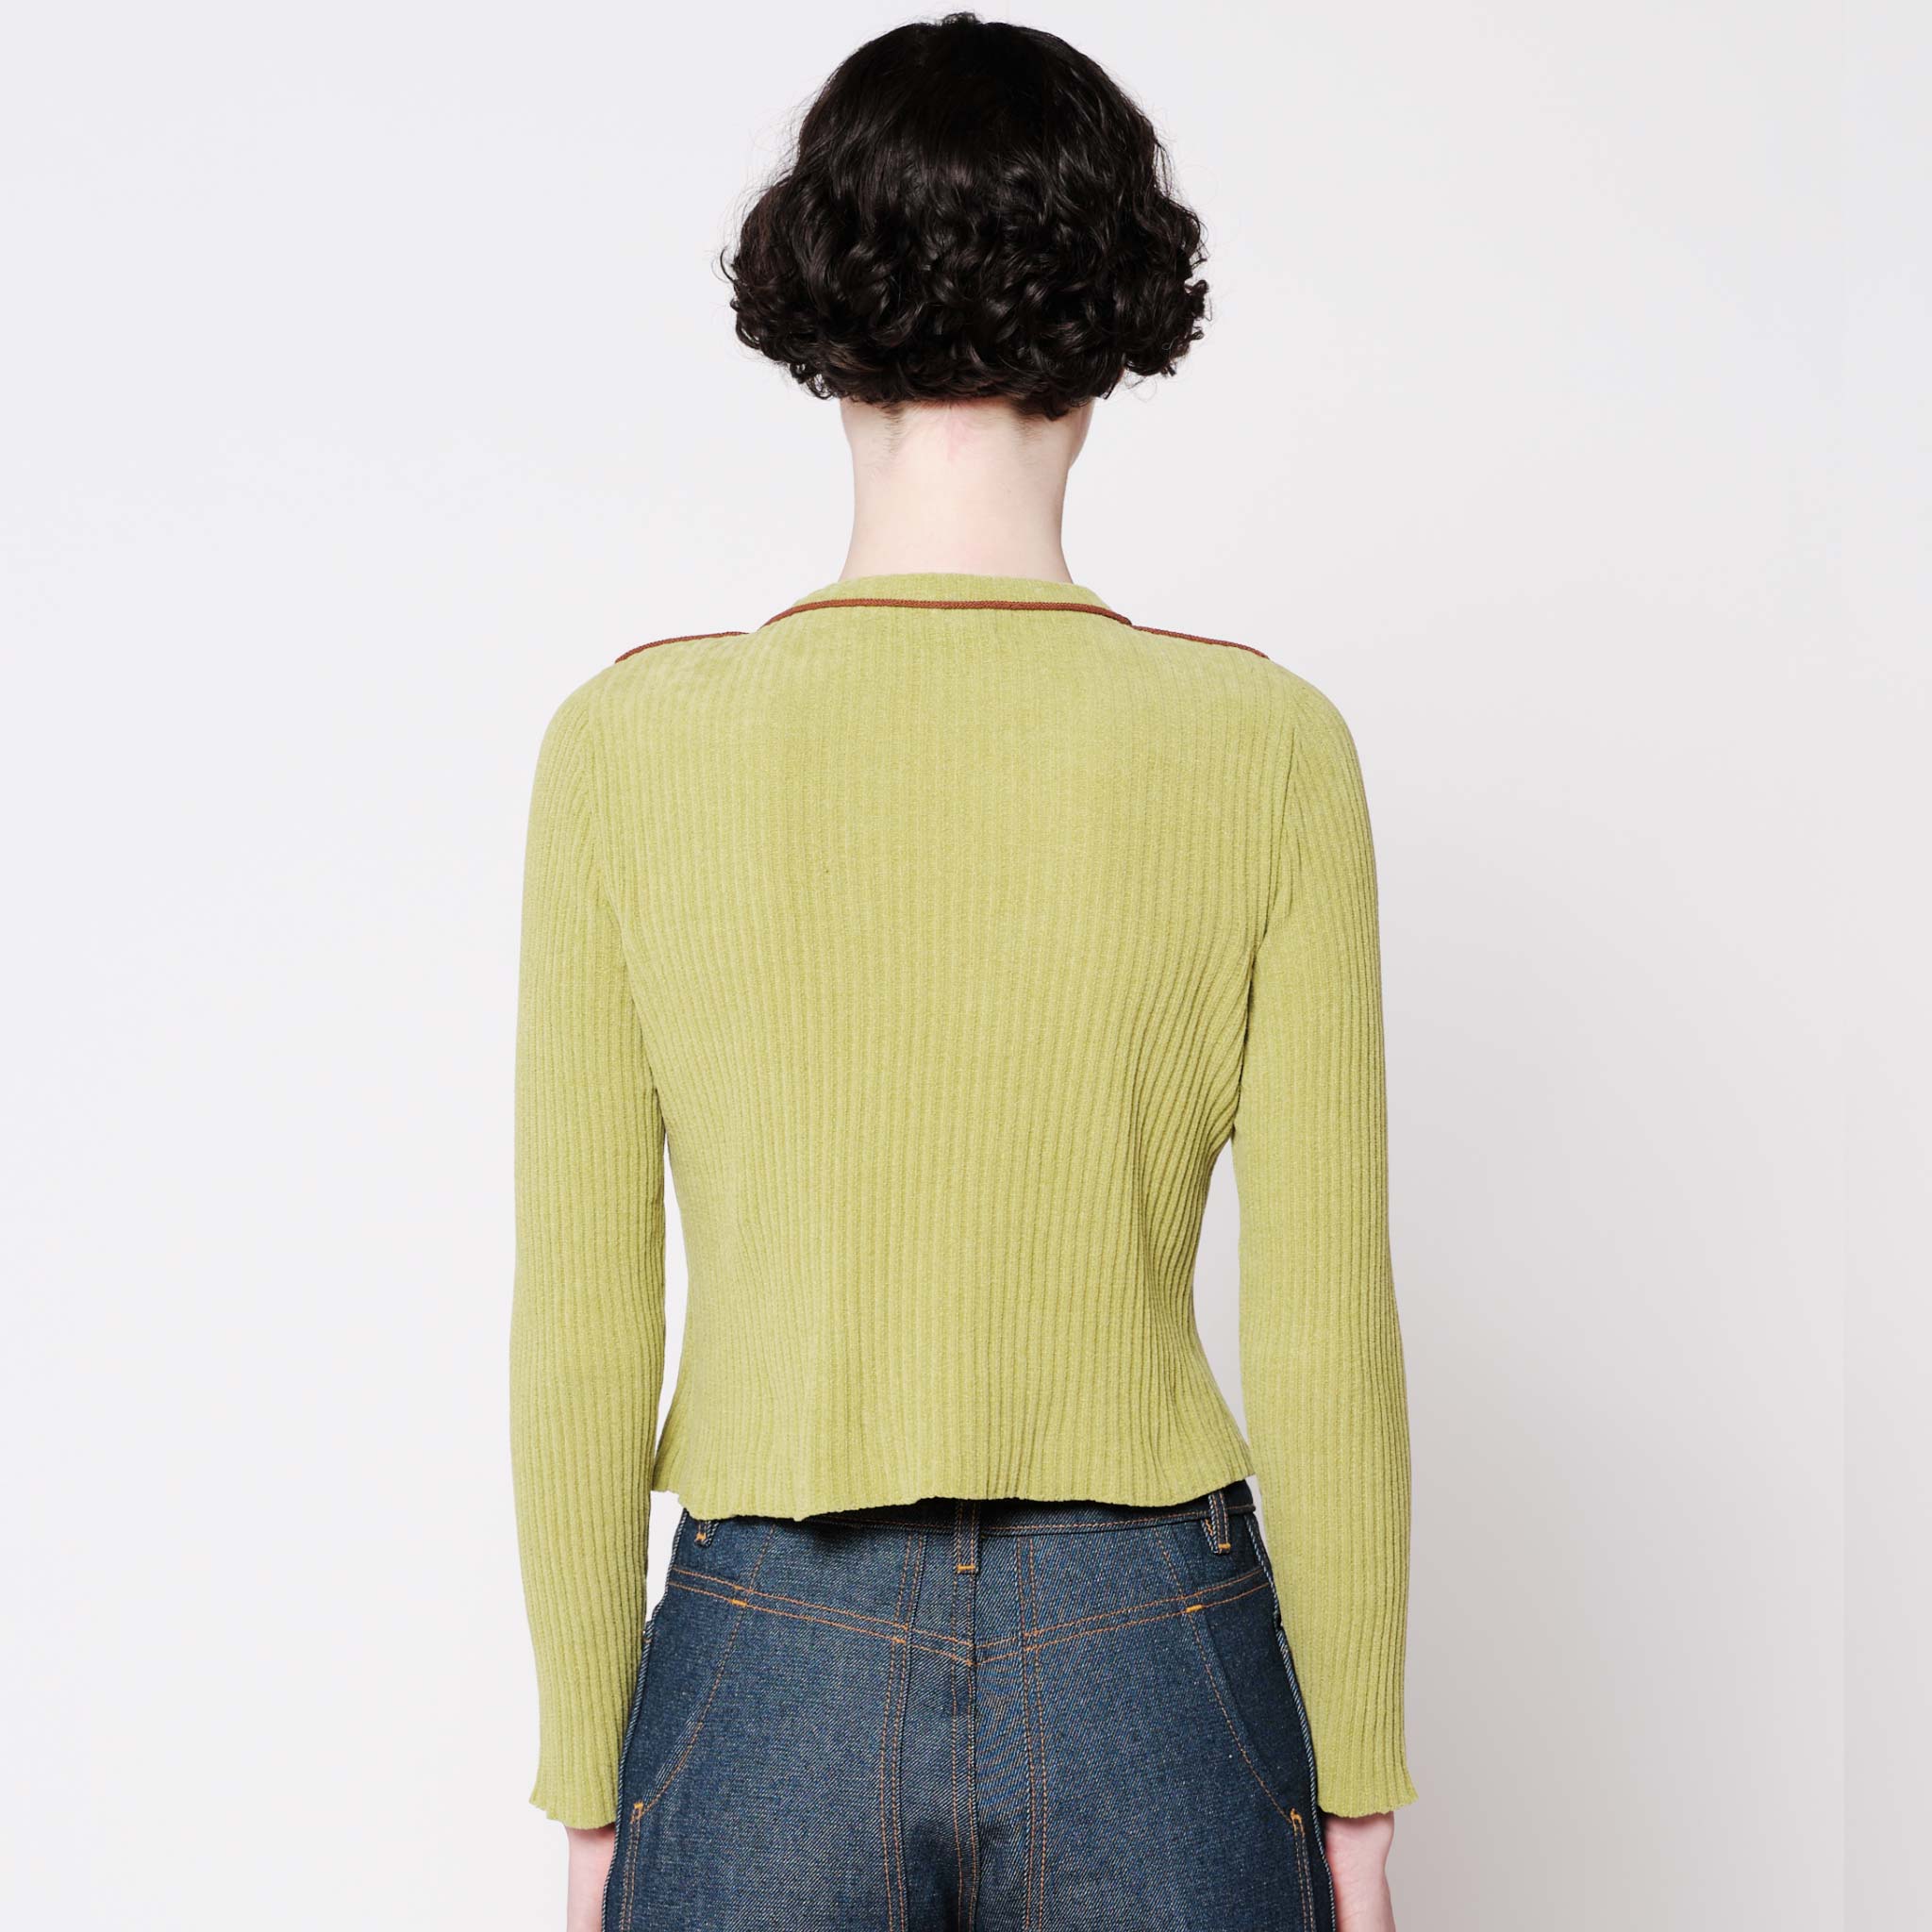 Back half body photo of model wearing the Angle Cardigan - Lime.